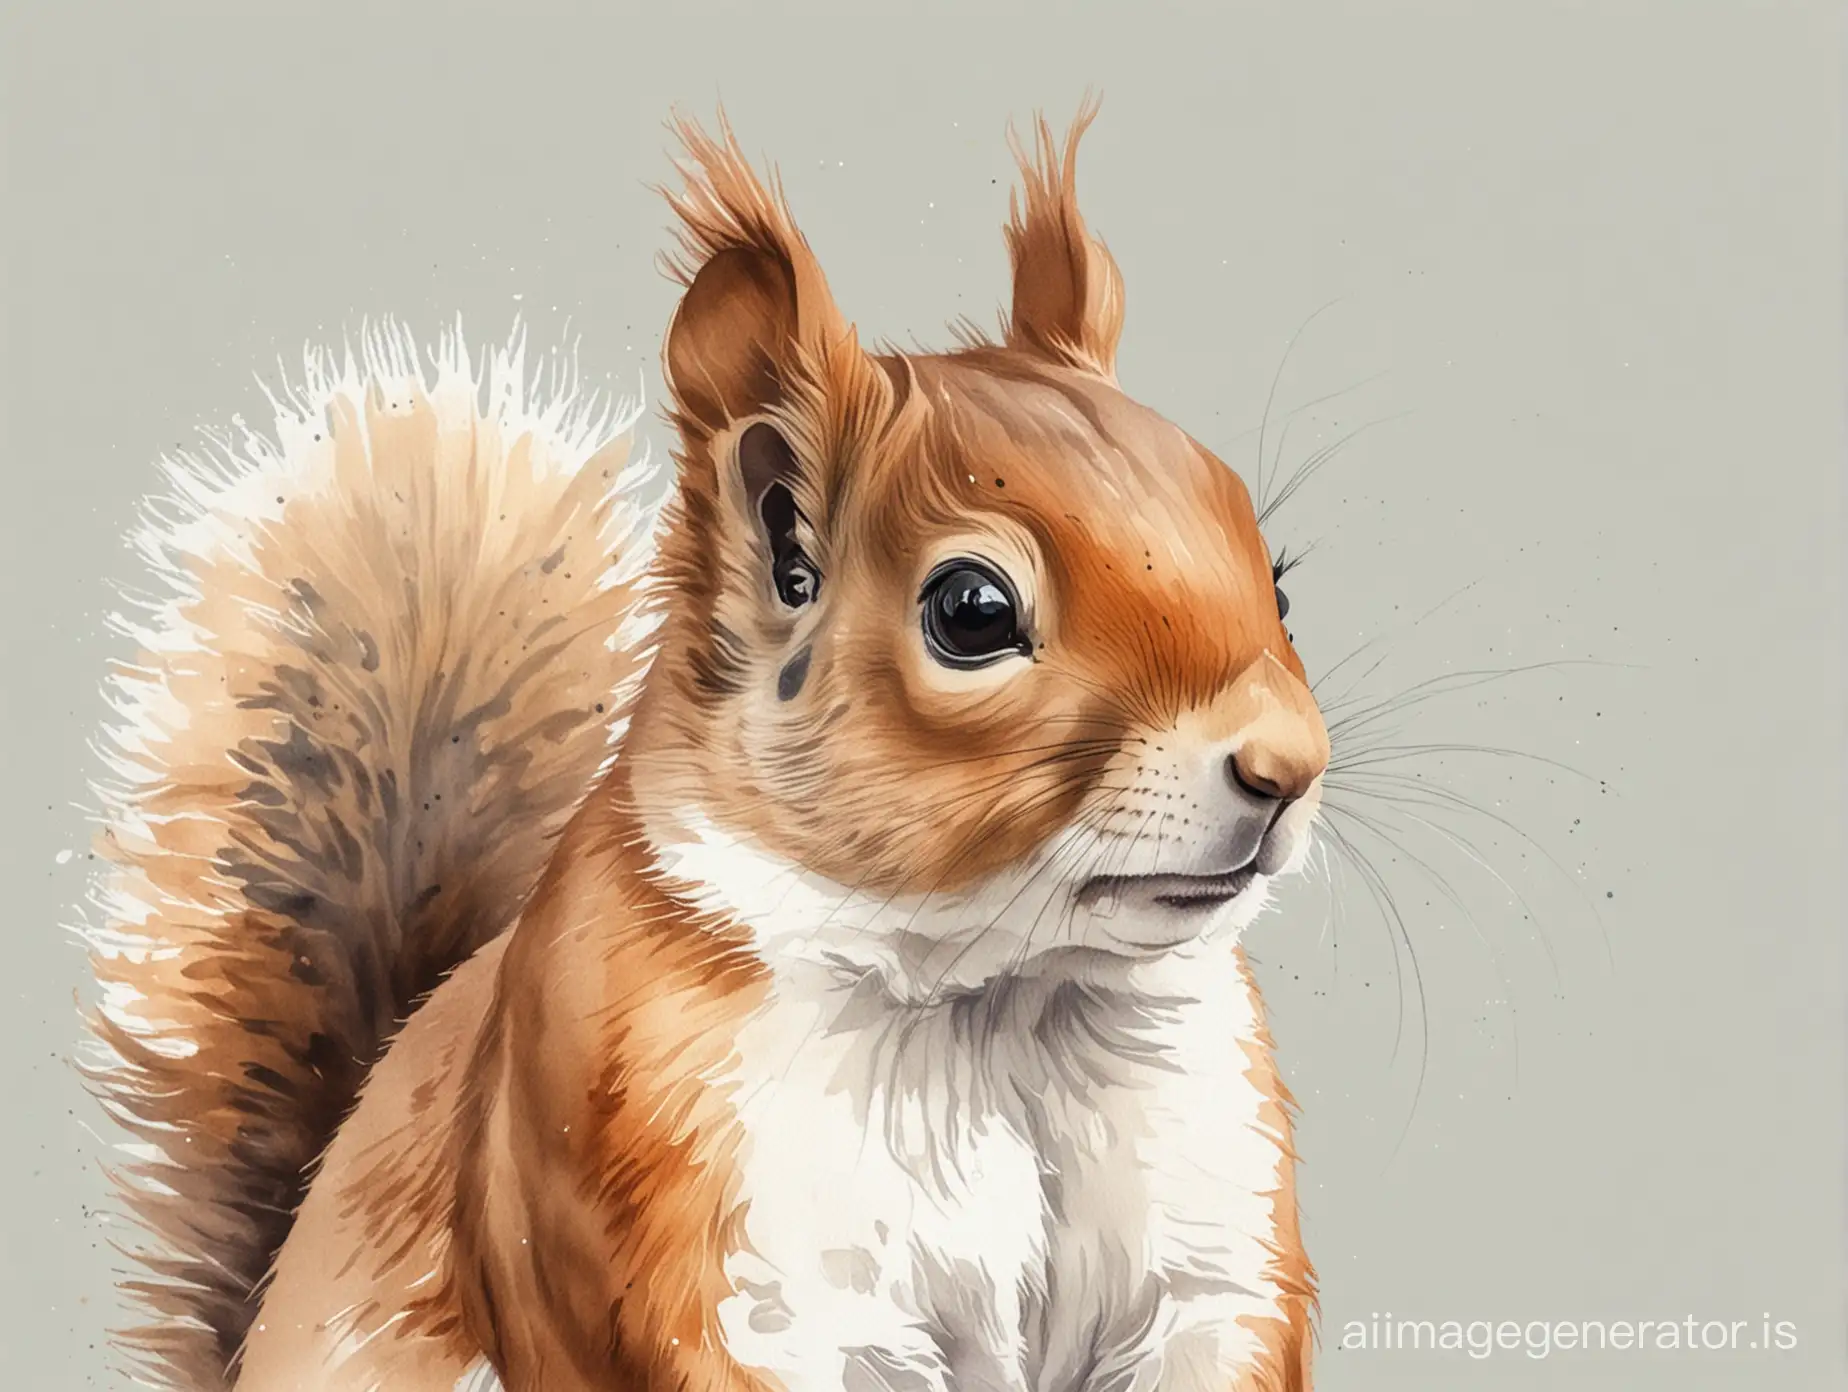 Elegant-Squirrel-Portrait-White-French-Beard-and-Spectacles-in-Watercolor-Style